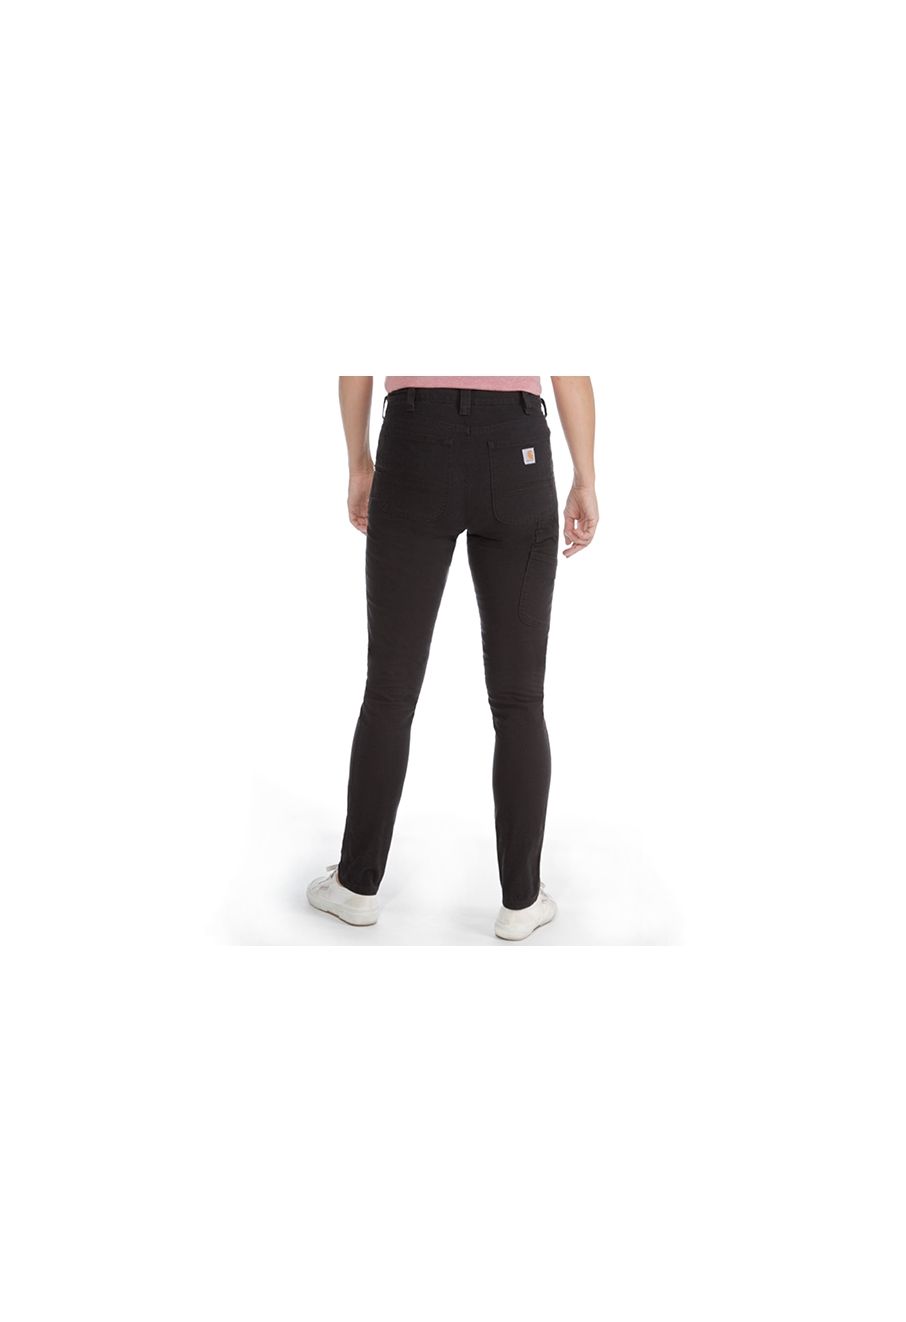 Carhartt Workwear 103224 Womens Slim-Fit Crawford Trouser Yukon Size:  W14/REG *One Size Only - Outlet Store* - Clothing from MI Supplies Limited  UK